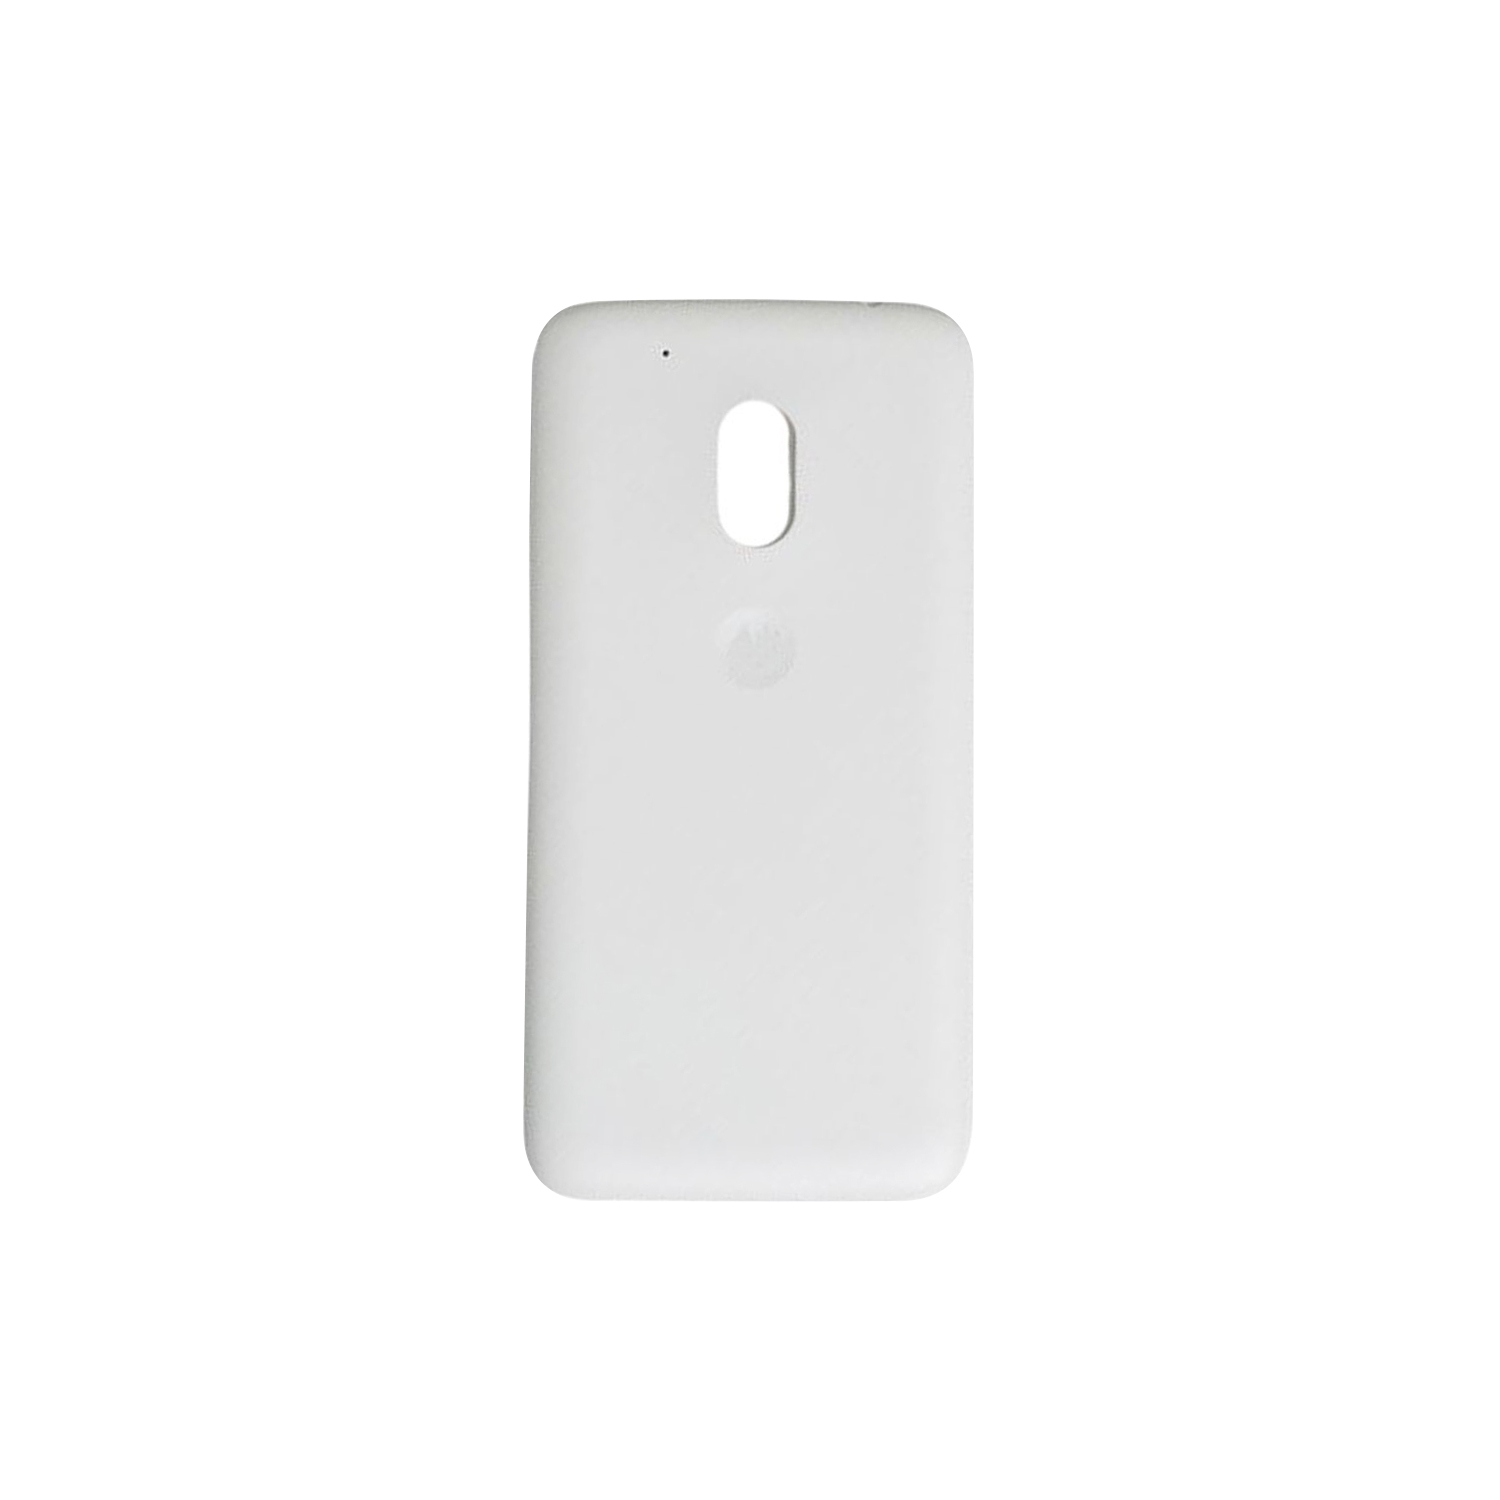 Replacement Battery Back Housing Cover Compatible With Motorola Moto G4 Plus - White